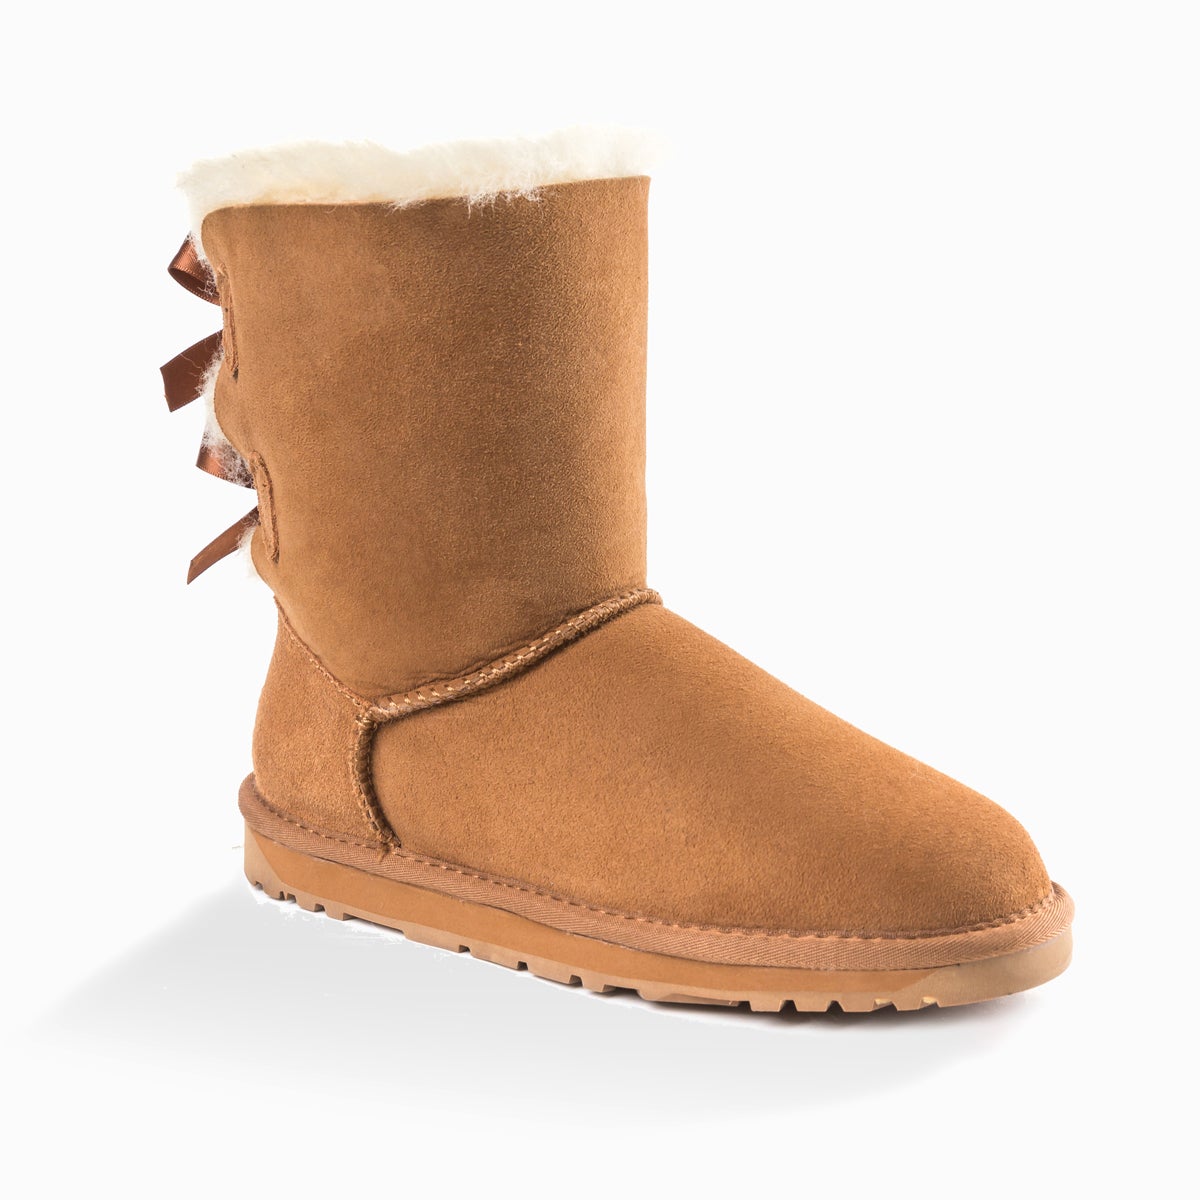 Ugg Classic Bailey Bow Boots (Water Resistant) Ozwear Ugg